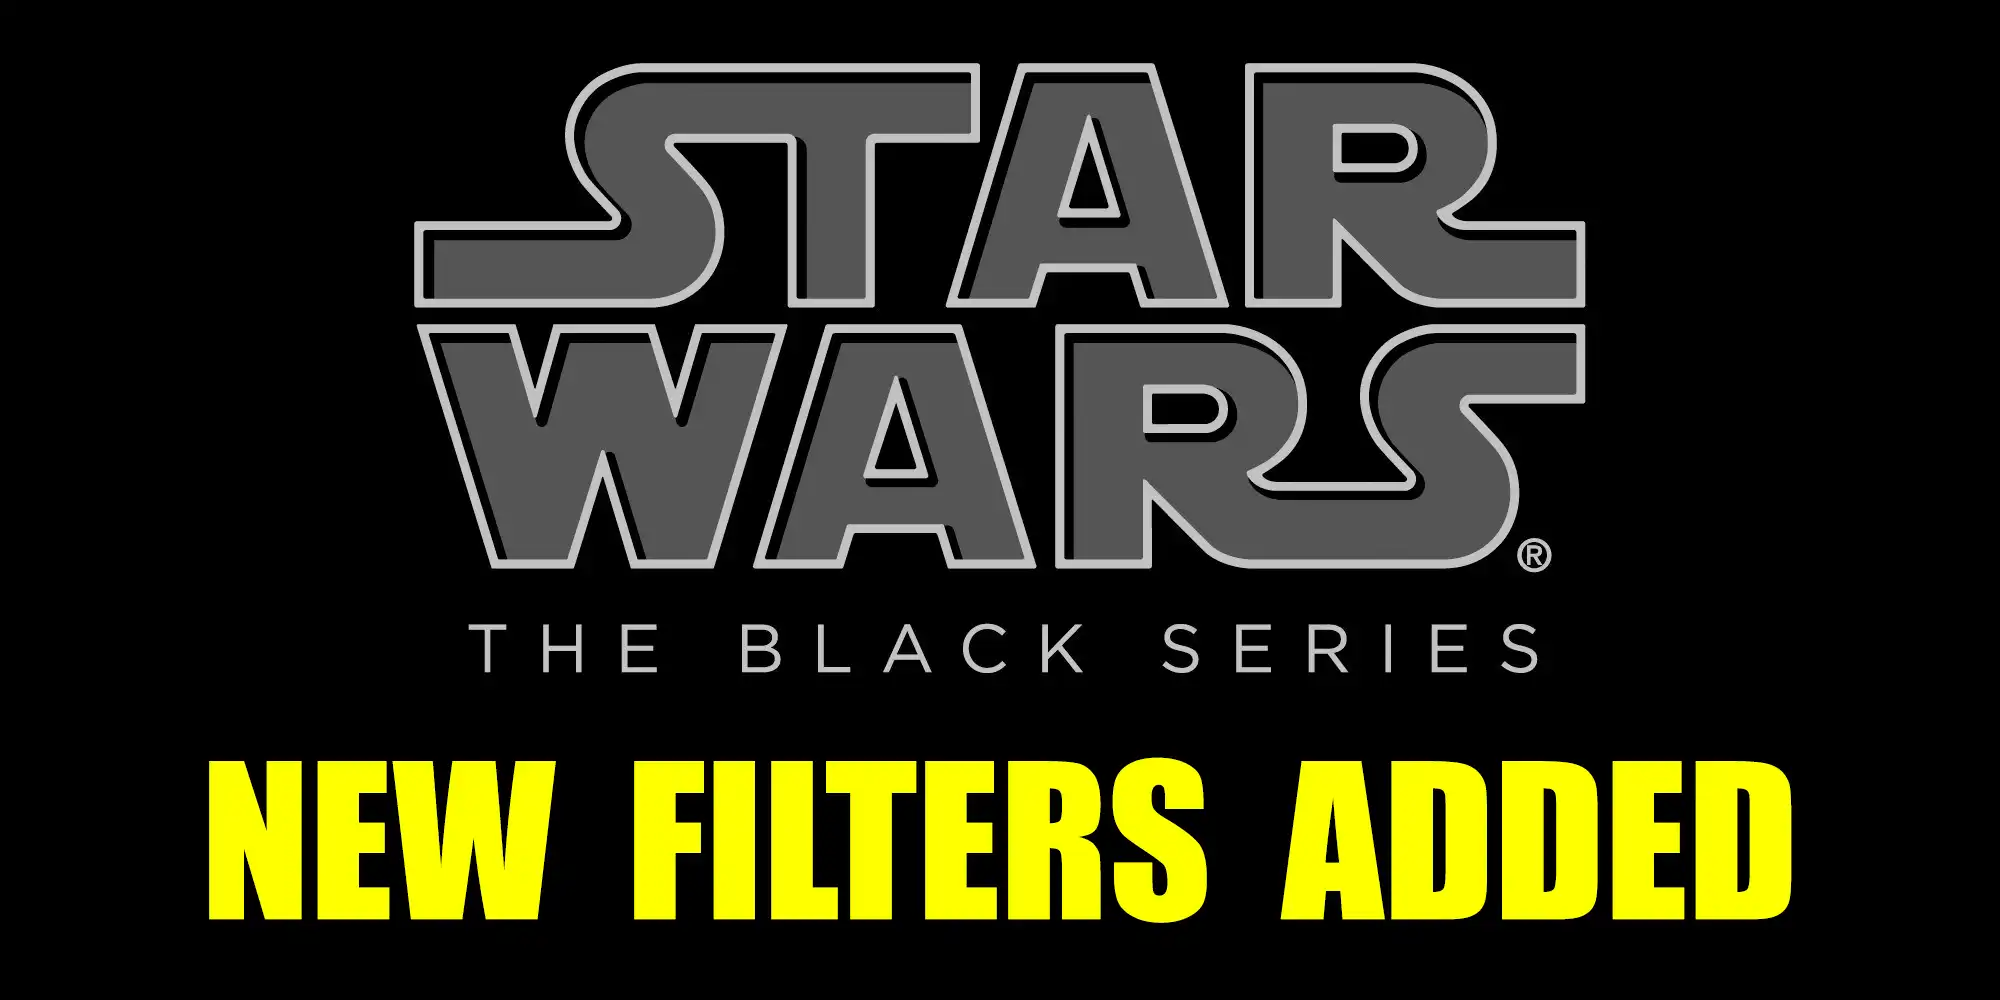 Star Wars The Black Series New Filters Added